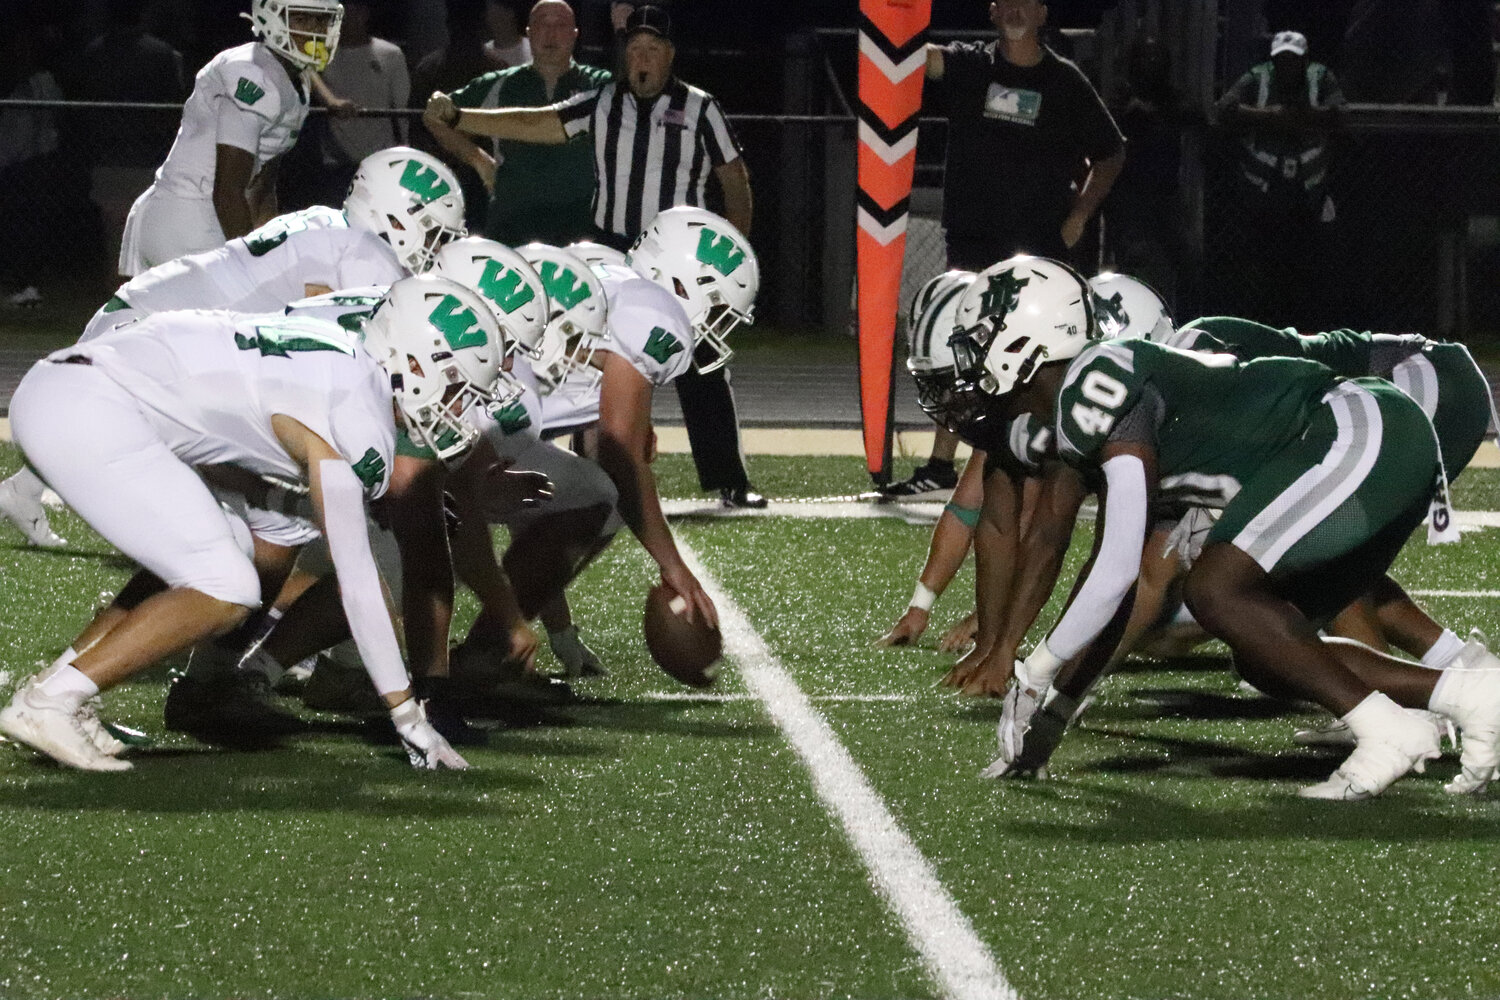 Outside of the season opener against Colquitt County (GA), the Dutch Fork defense has held all opponents under 20 points.